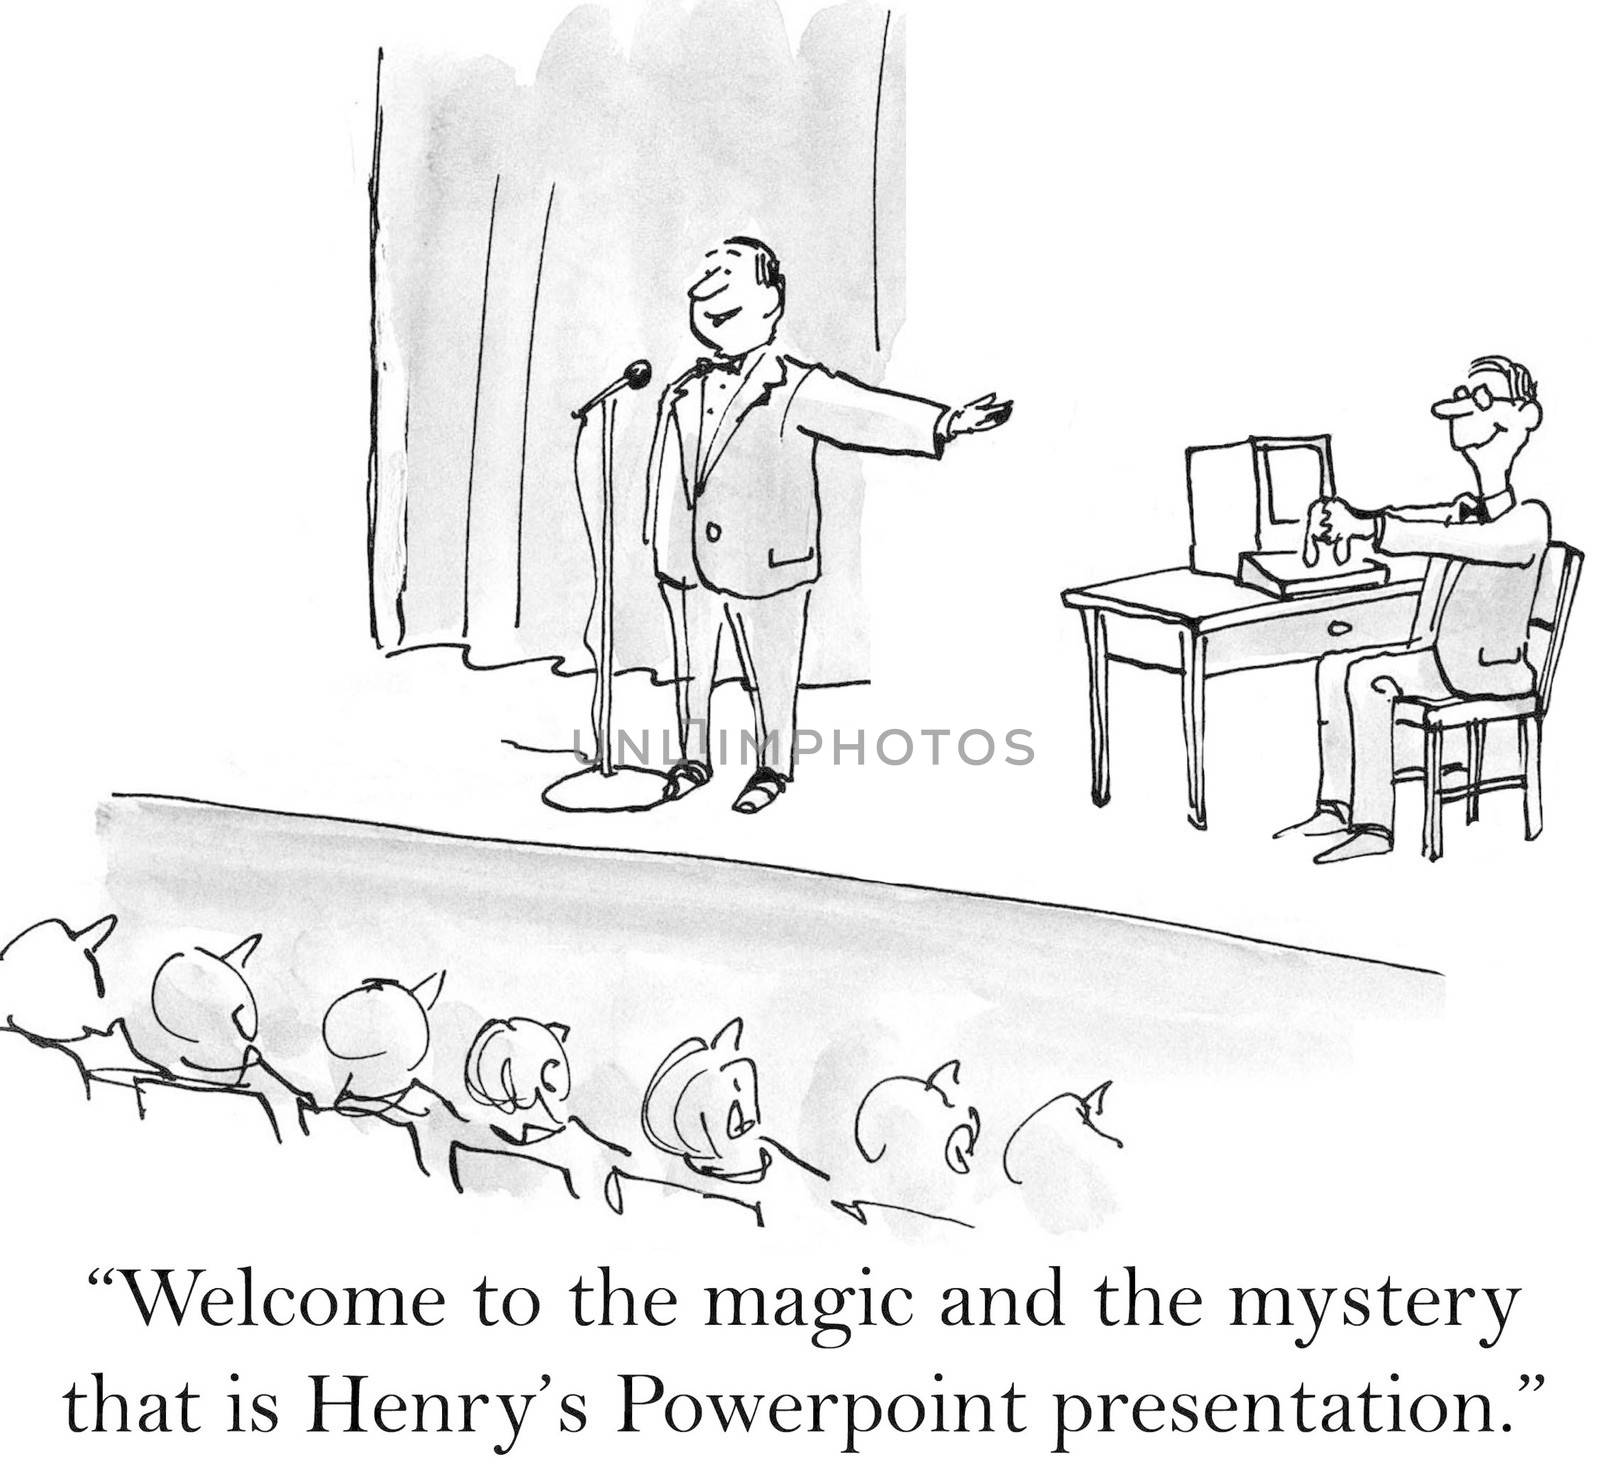 "Welcome to the magic and the mystery that is Henry's Powerpoint presentation."